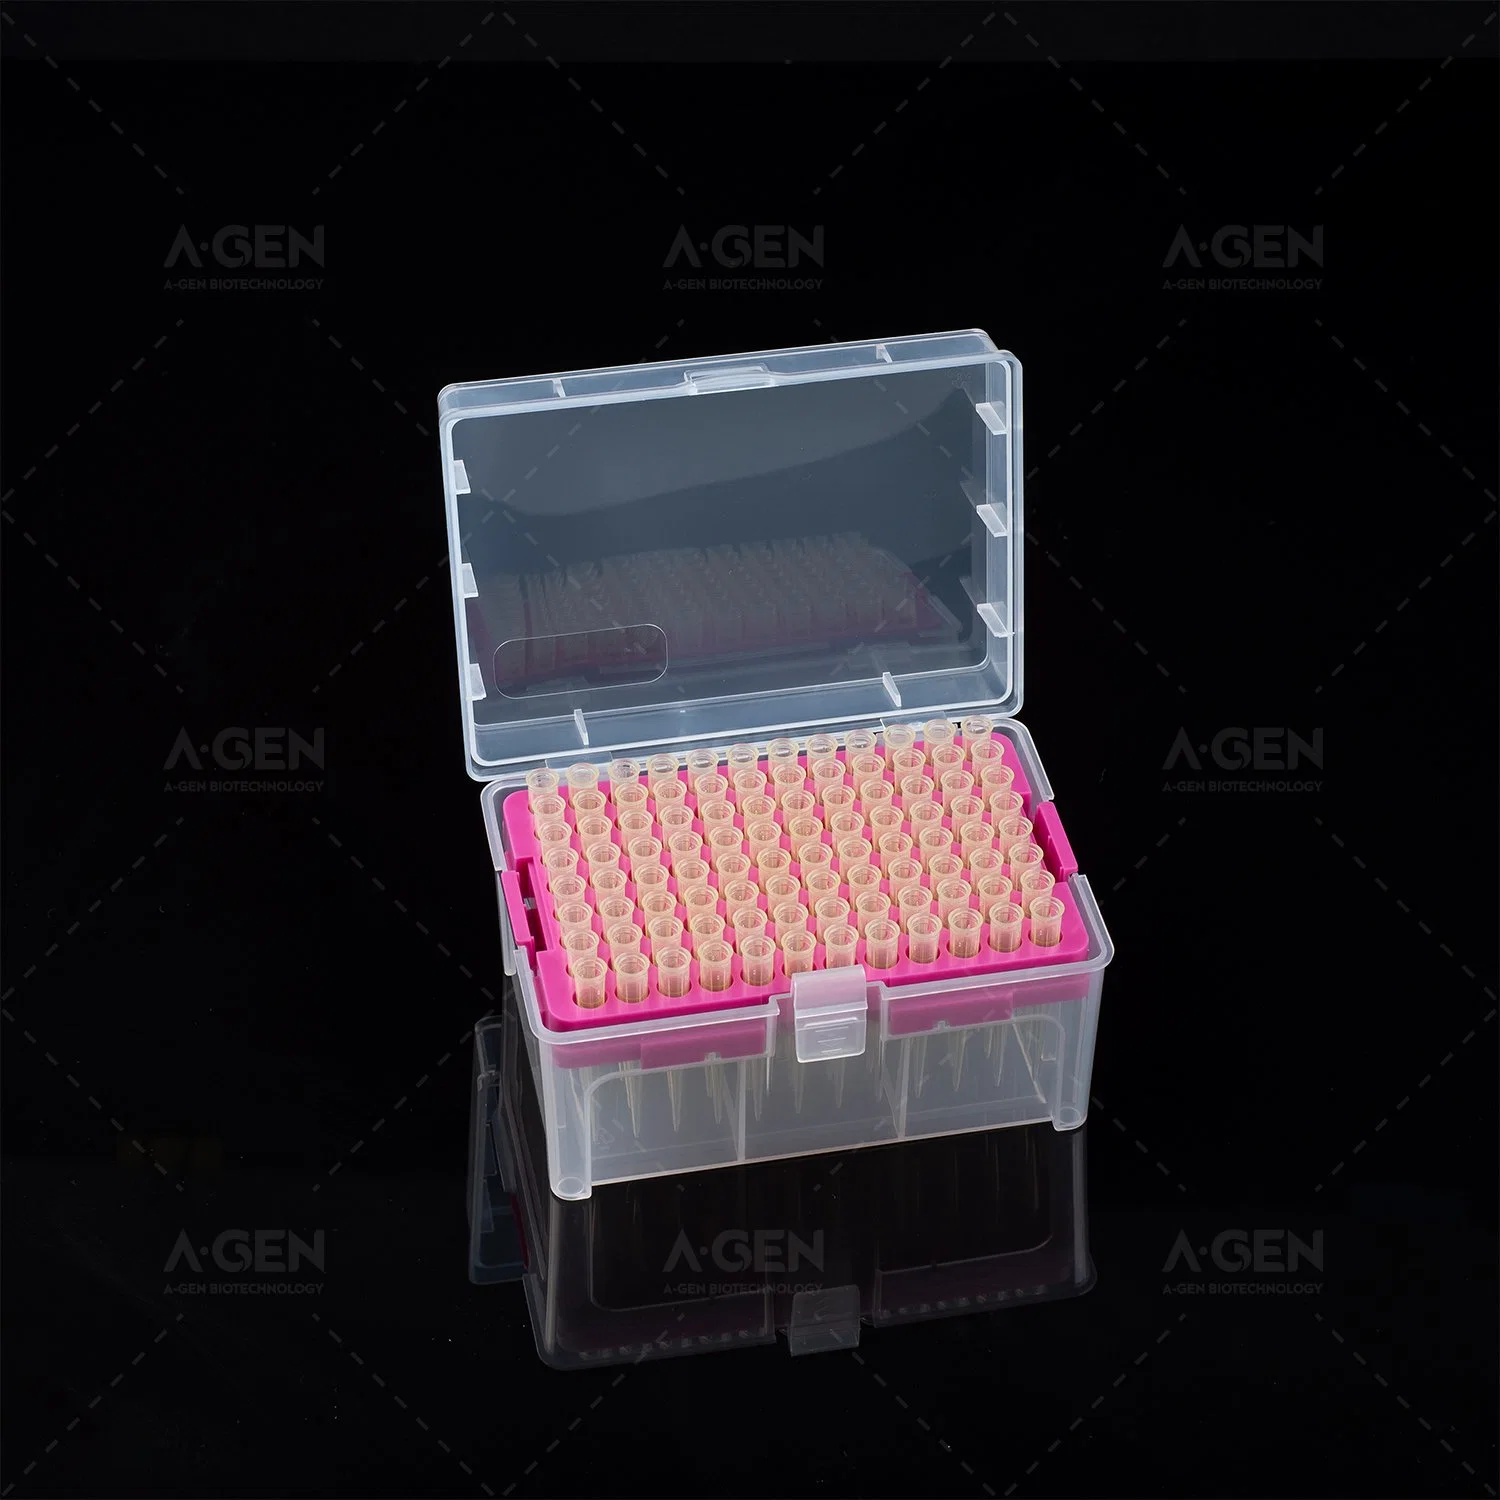 10UL 11UL 200UL 300UL 1000UL 1250UL Yellow Blue Sterile Universal Dnase Rnase Free Micro Without Filter Pipette Tip with CE